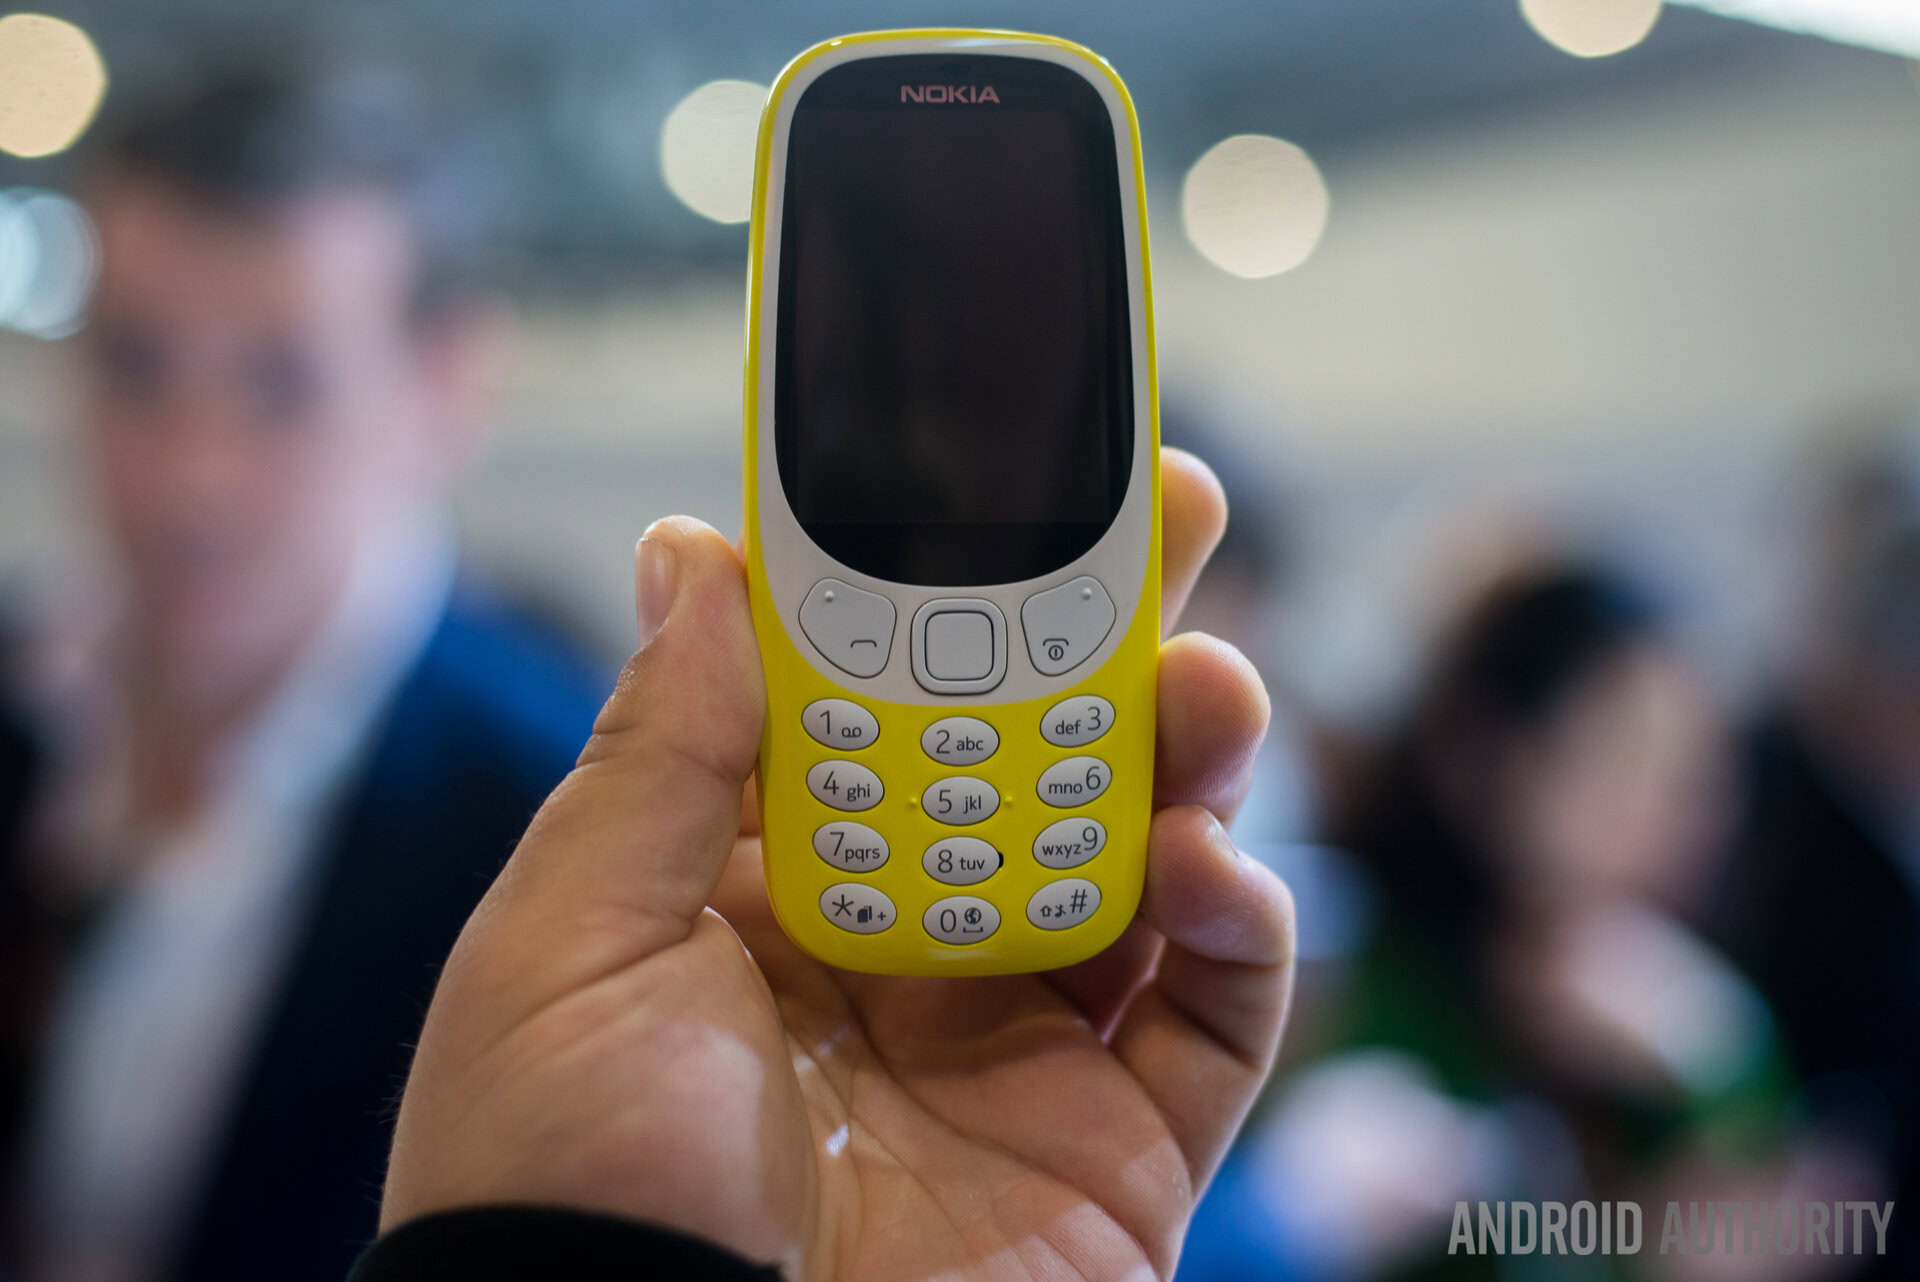 Nokia's Classic 3310 Phone Lives Again - And It Has 'Snake' Too